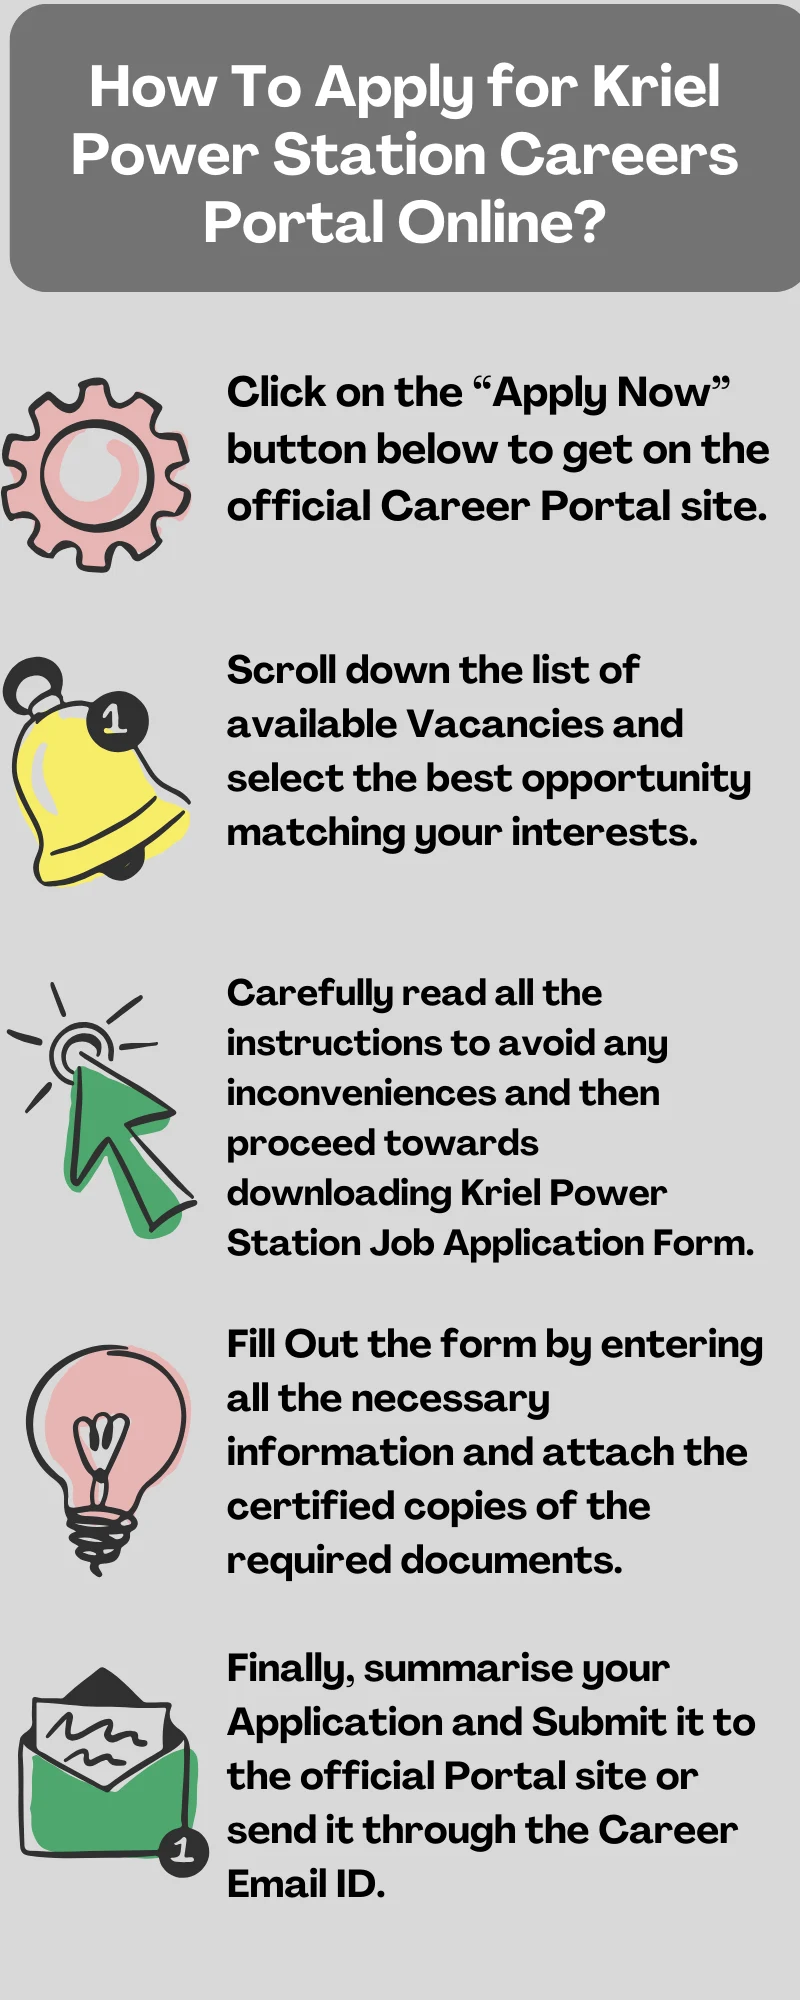 How To Apply for Kriel Power Station Careers Portal Online?